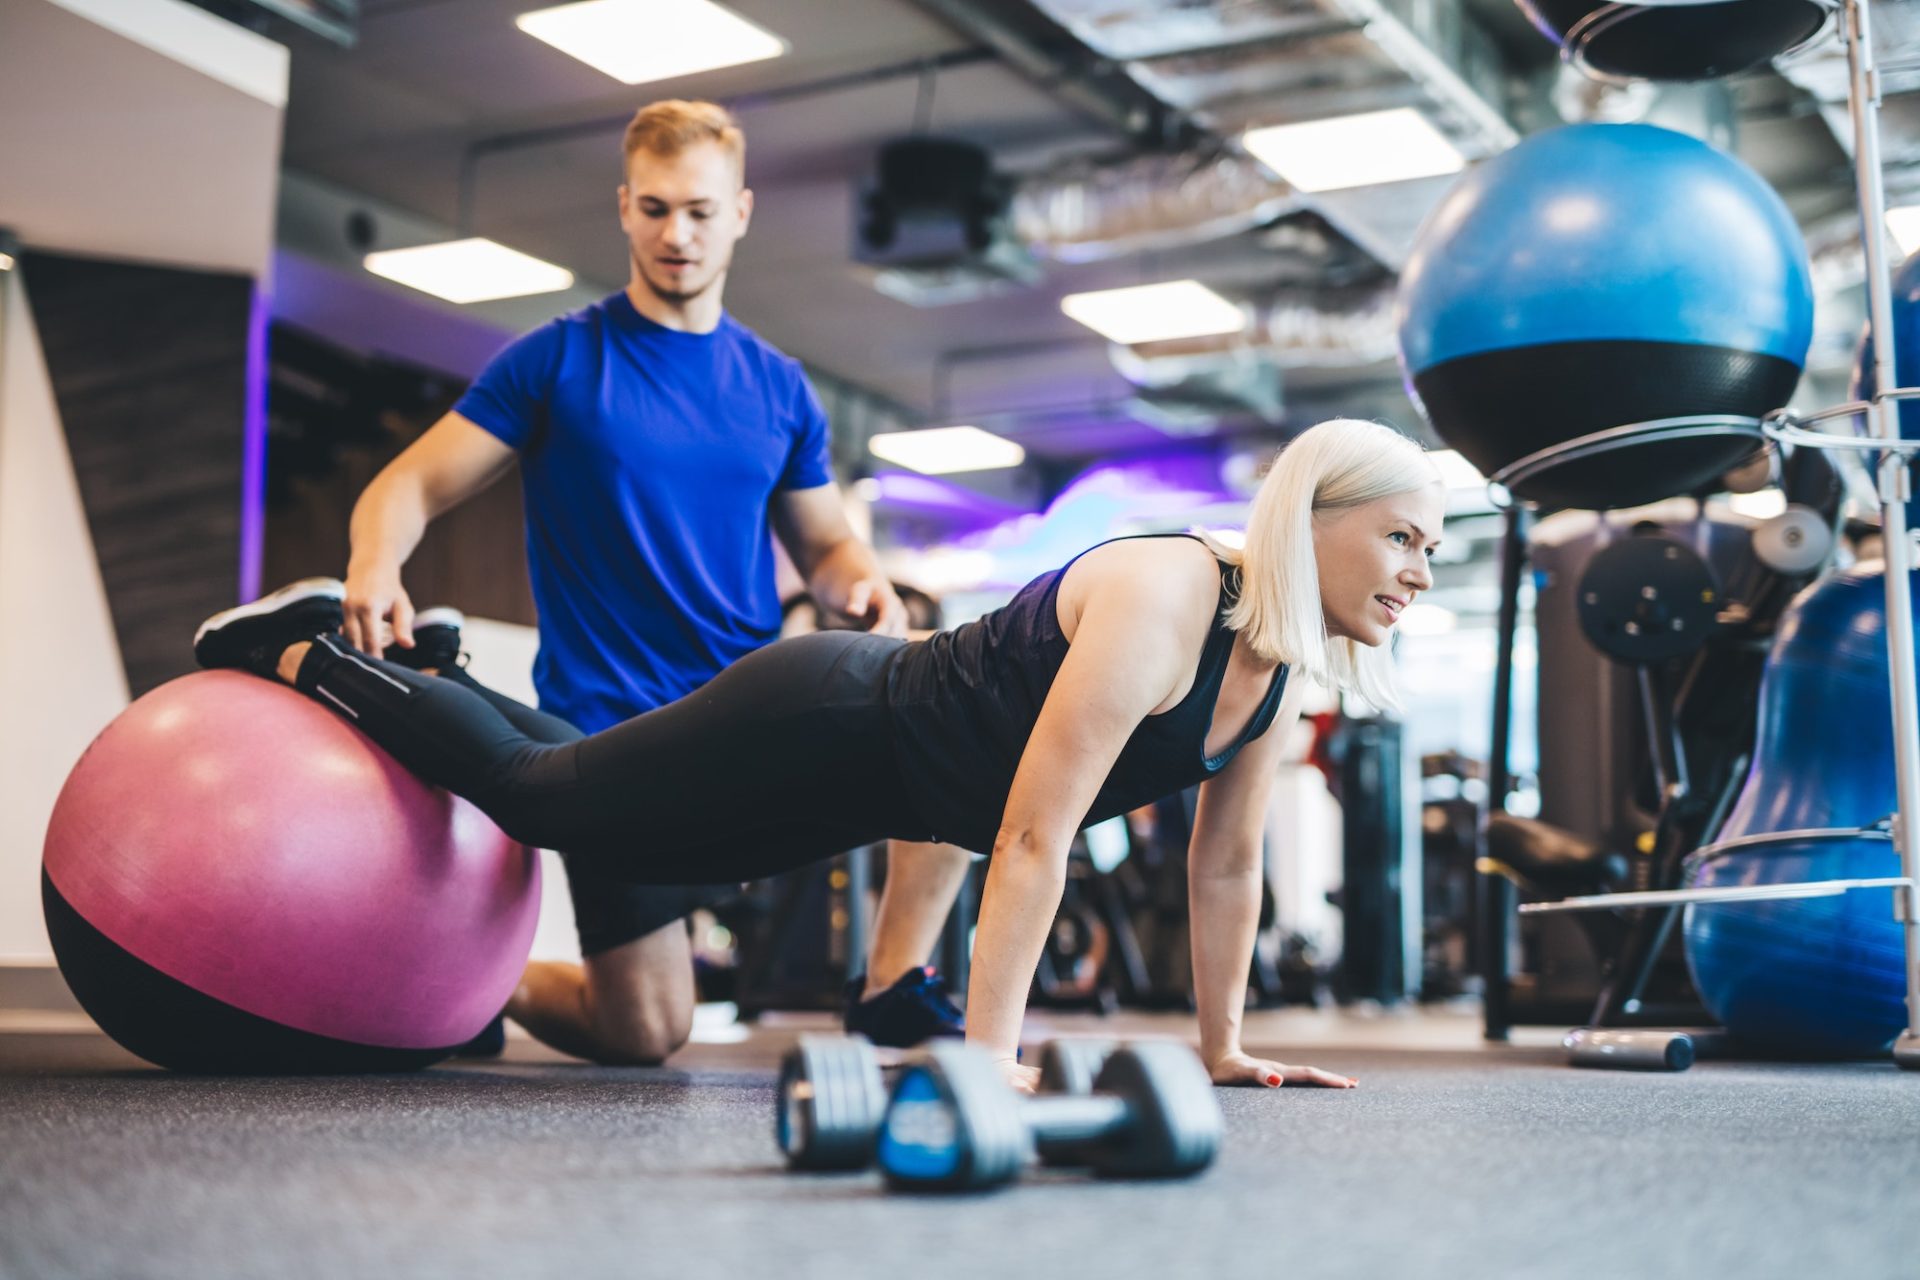 Woman working out on a ball with personal trainer.